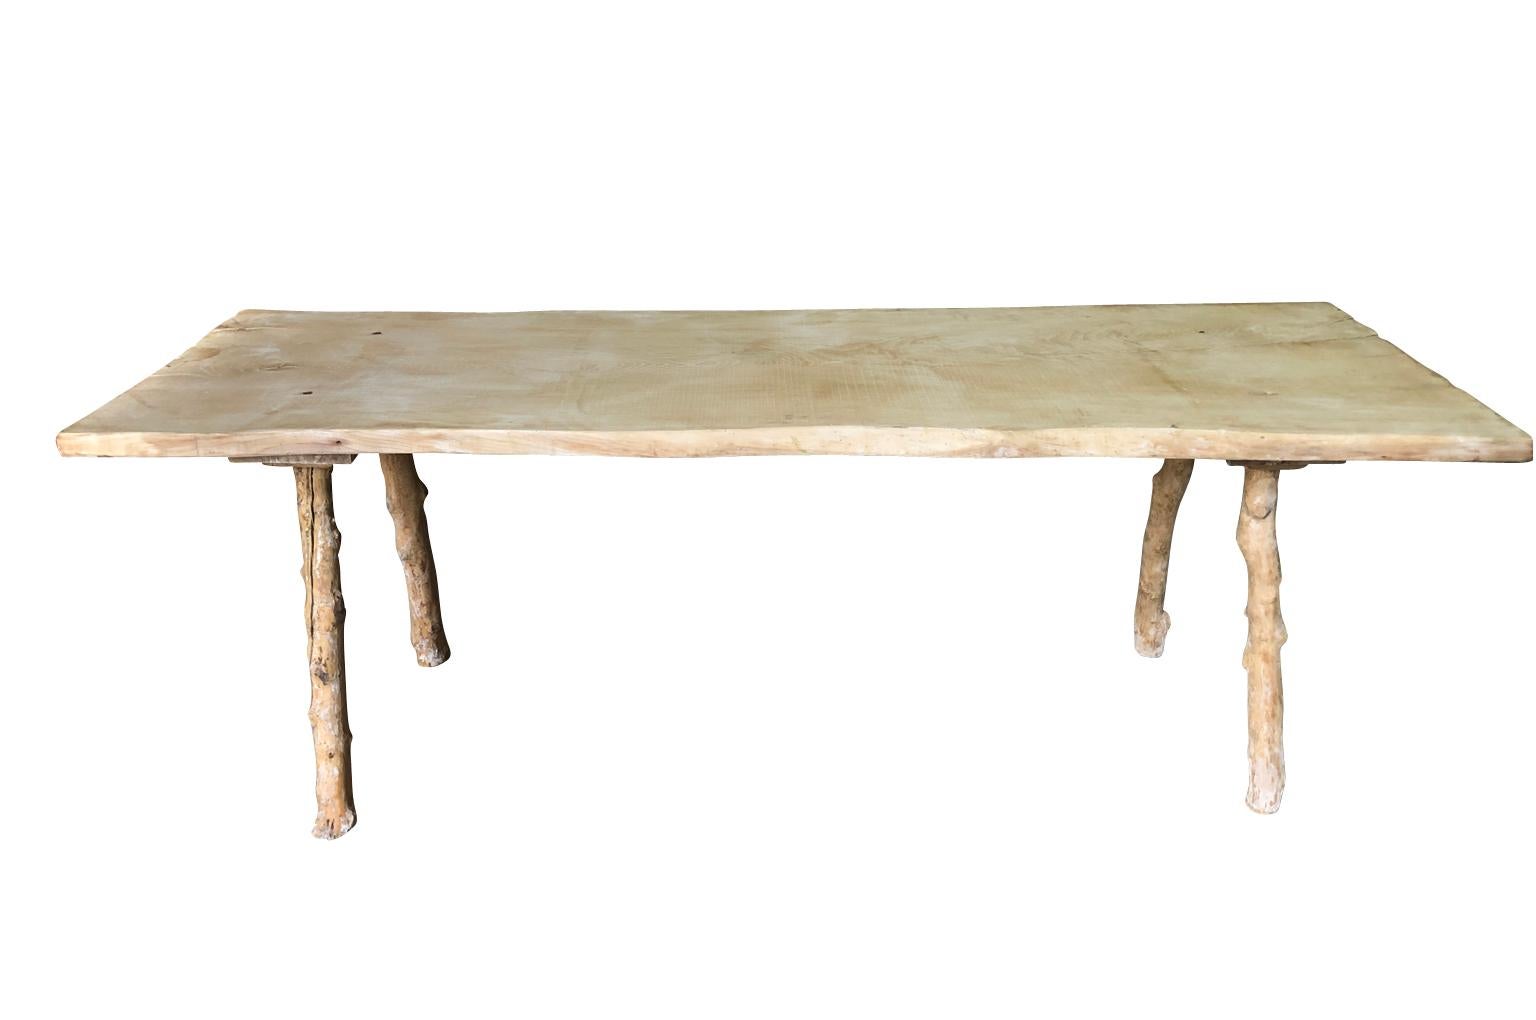 A charming and primitive 19th century farm table from Portugal wonderfully constructed from a solid board top of washed oak and olive trunk legs.